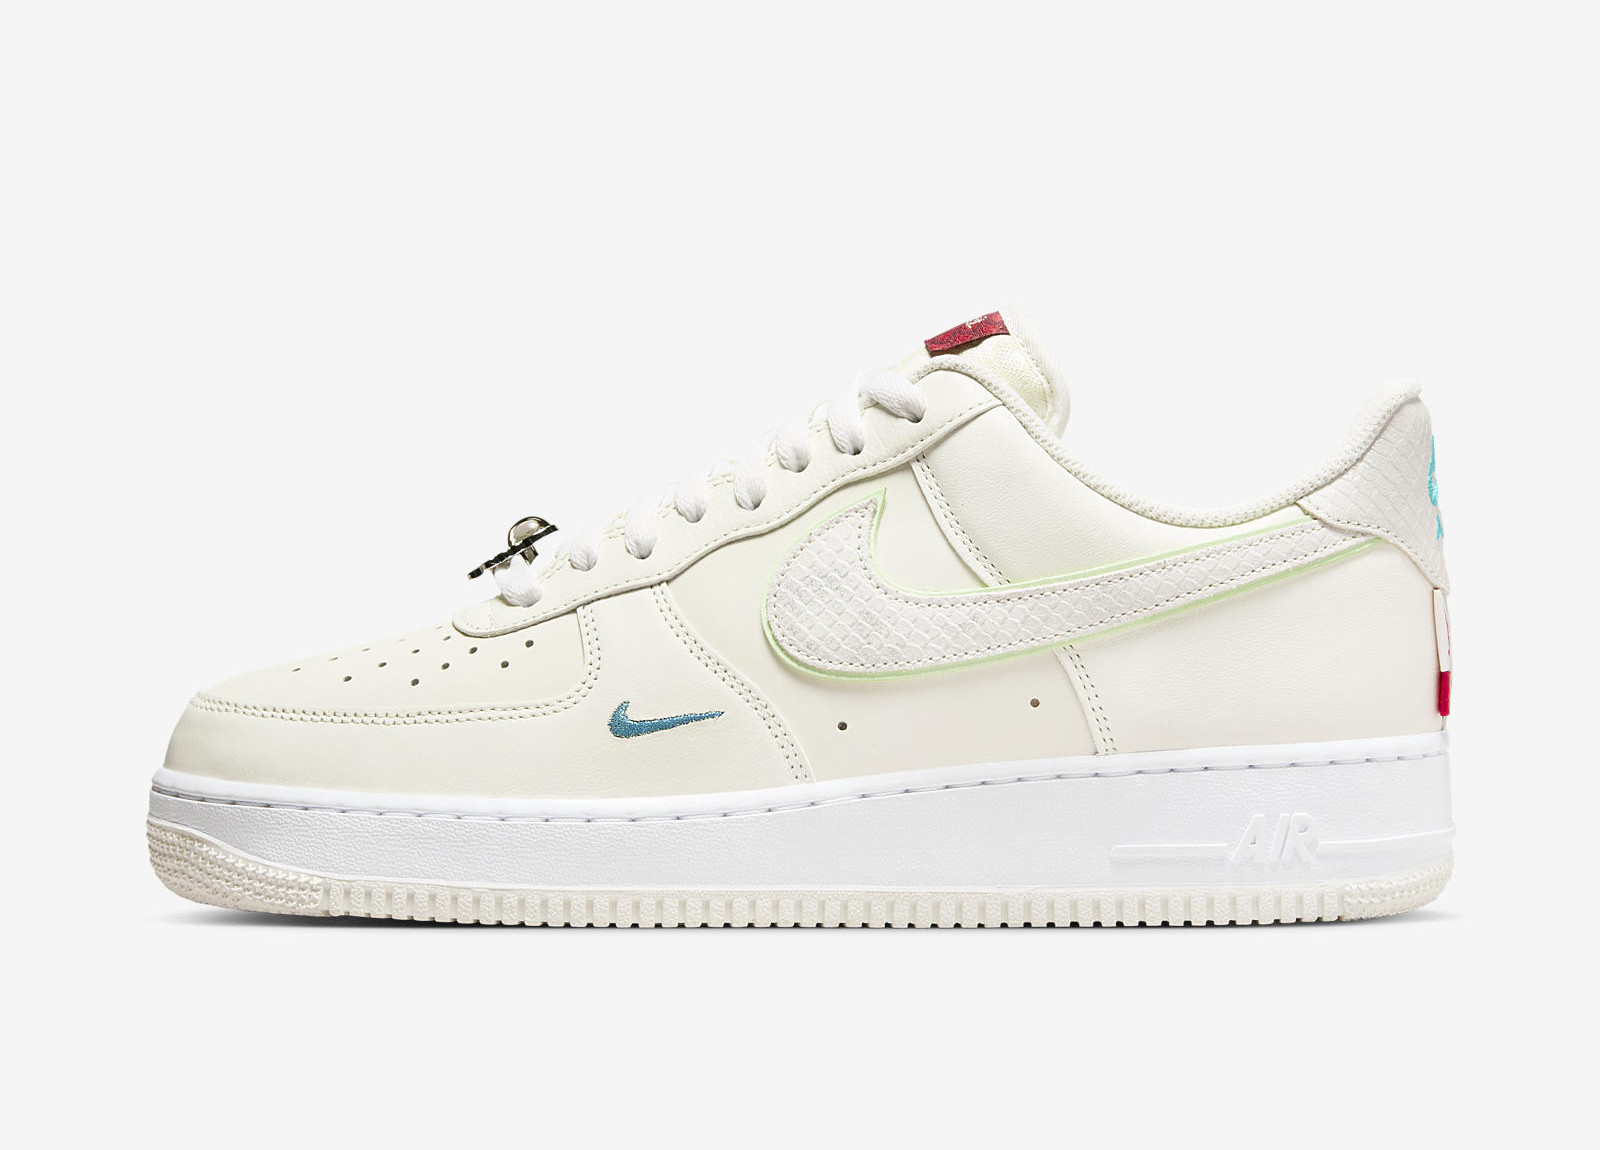 Nike Air Force 1 Low
« Year of the Dragon »